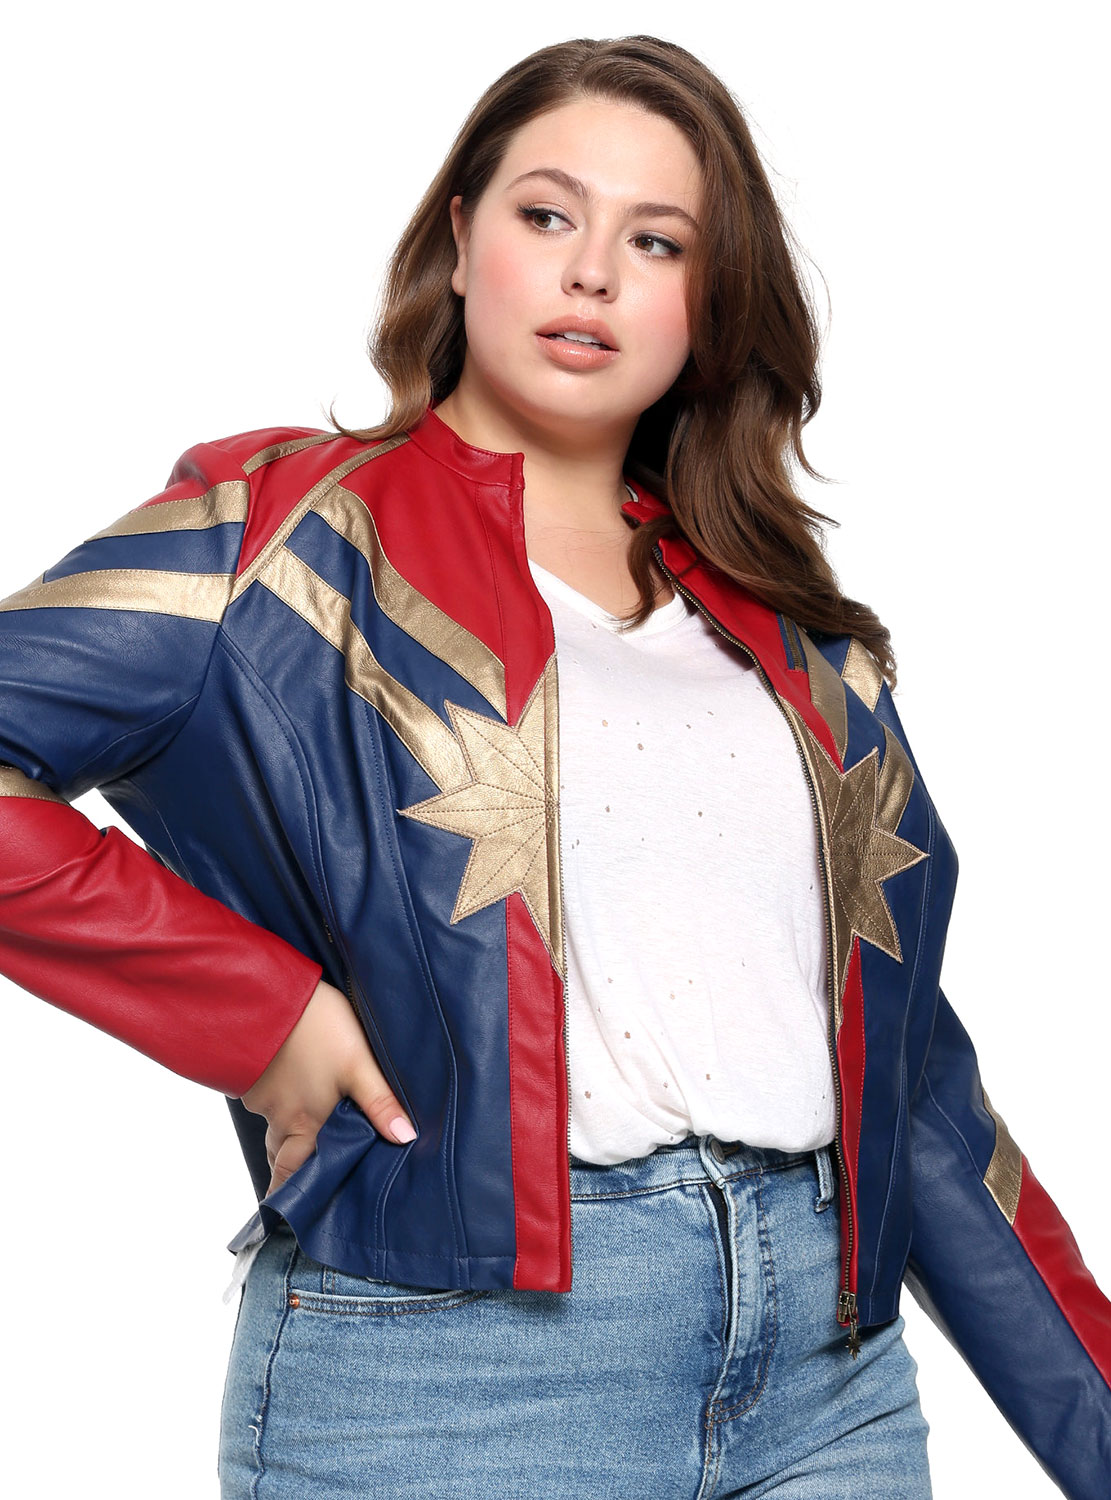 Details about   WOMENS CAPTAIN MARVEL 2019 FAUX LEATHER JACKET HALLOWEEN SPECIAL MARVEL COSTUME 